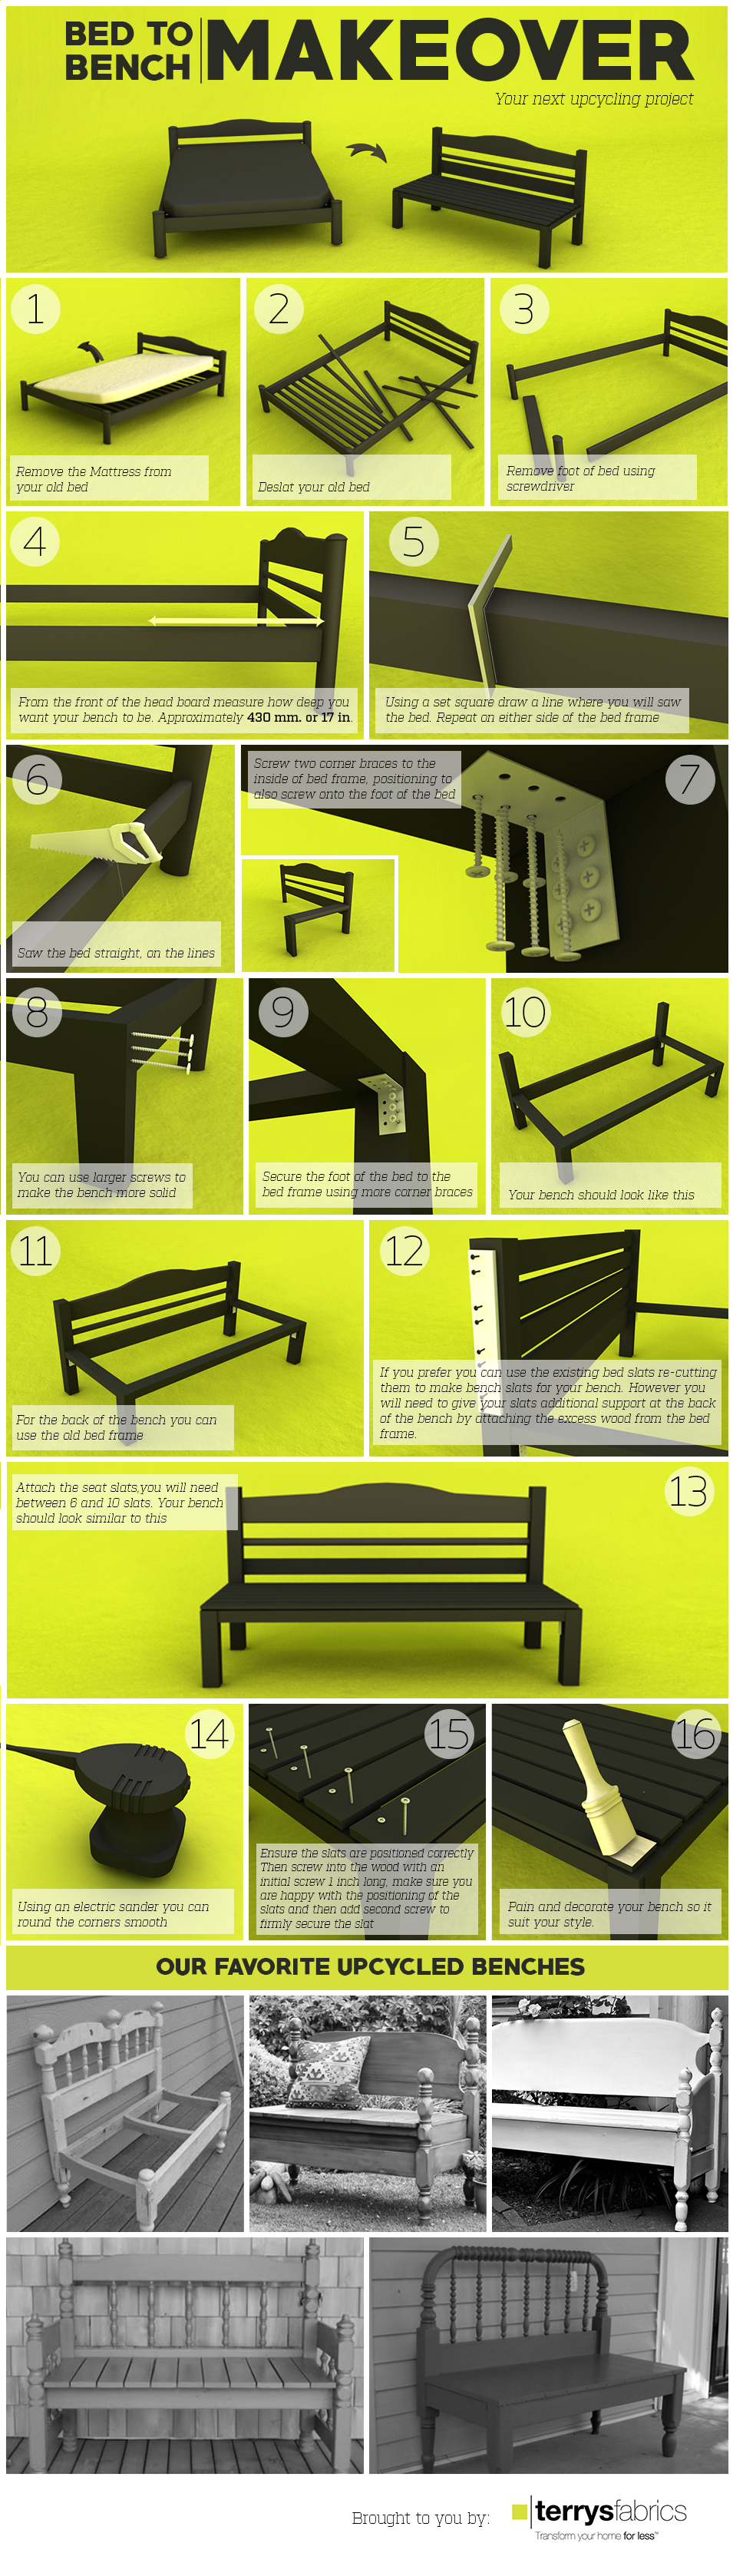 DIY-bed-to-bench-Instructions